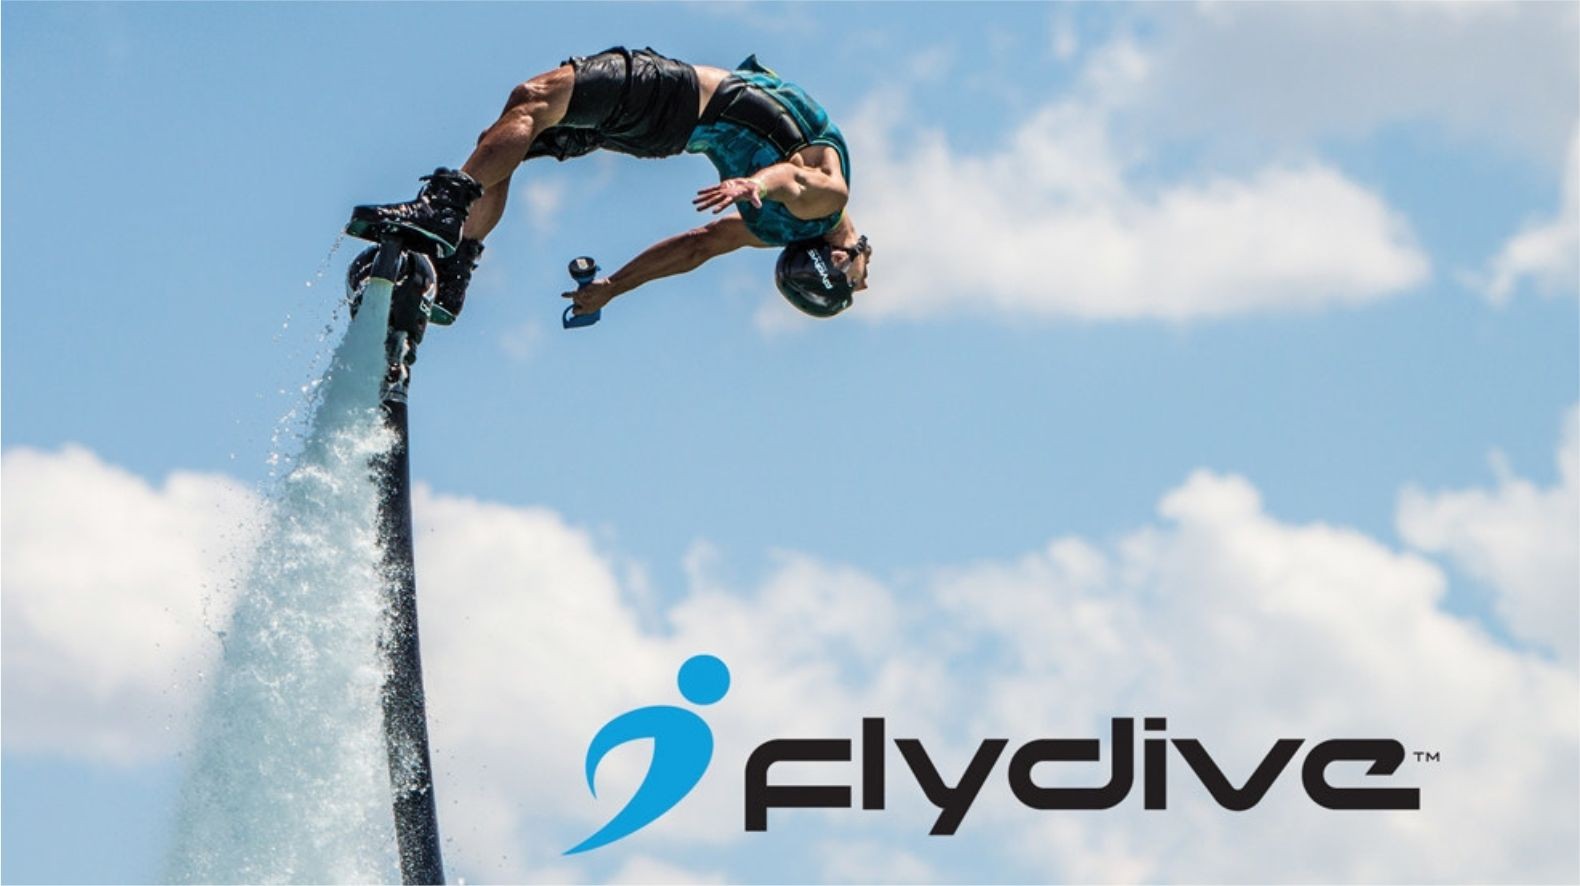 FLyboards